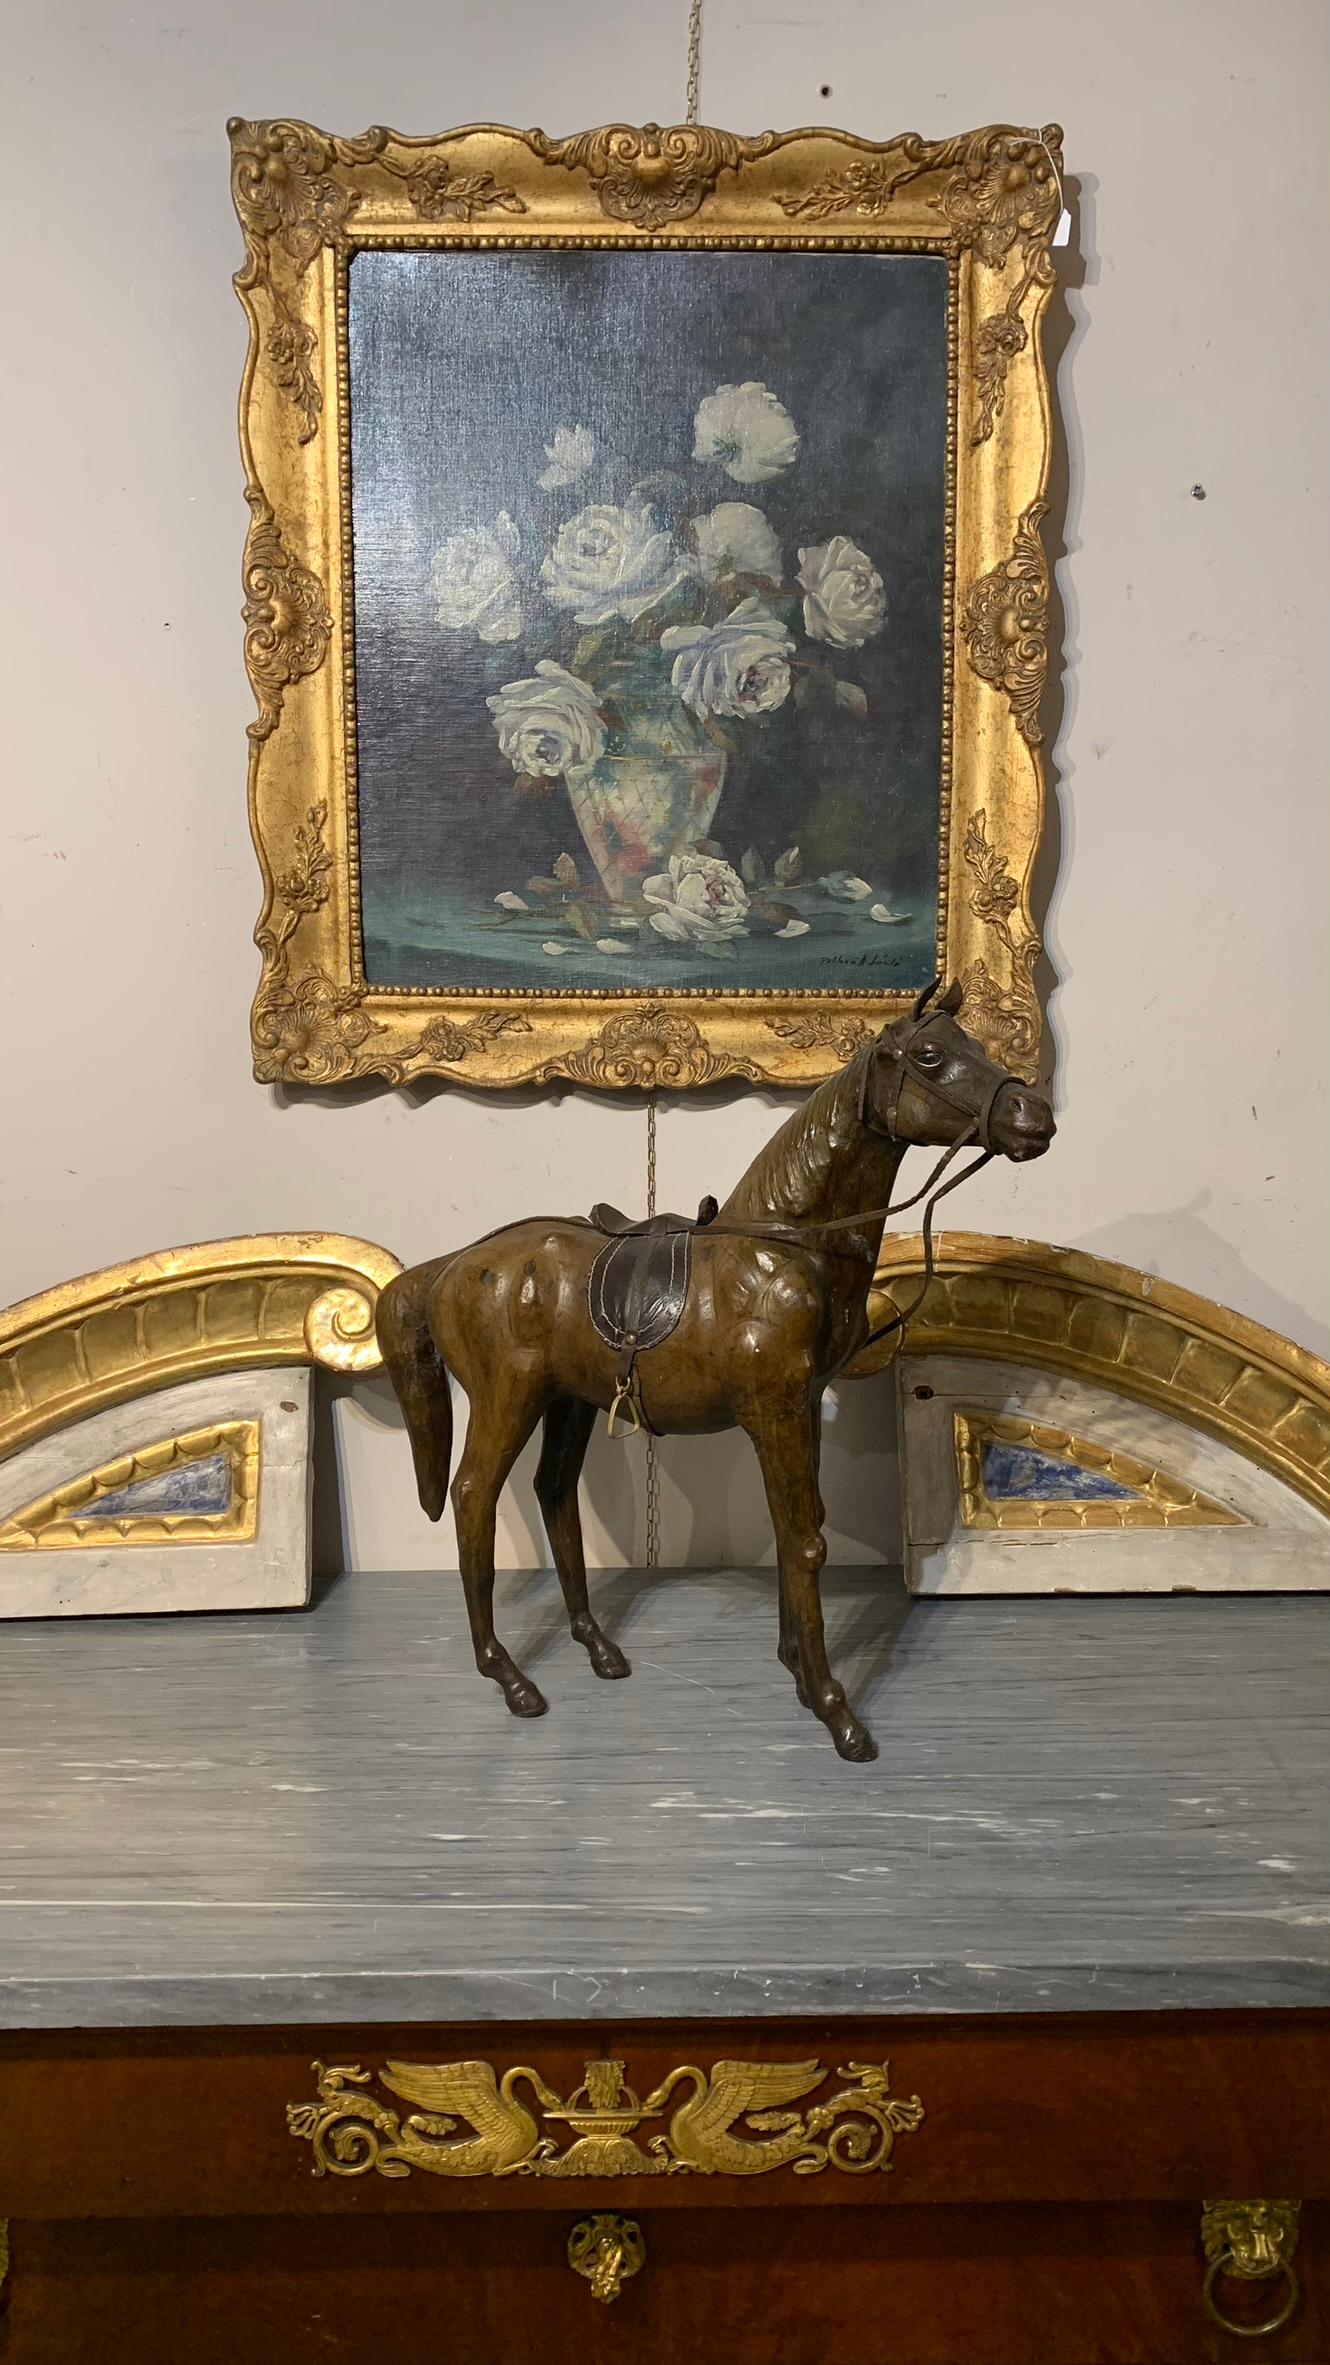 Beautiful horse model in papier-mâché covered in hand-crafted leather. You can see the attention to detail in the reproduction of the animal, and in its accessories such as the bridle and saddle. It is ascribed to 19th century Italian